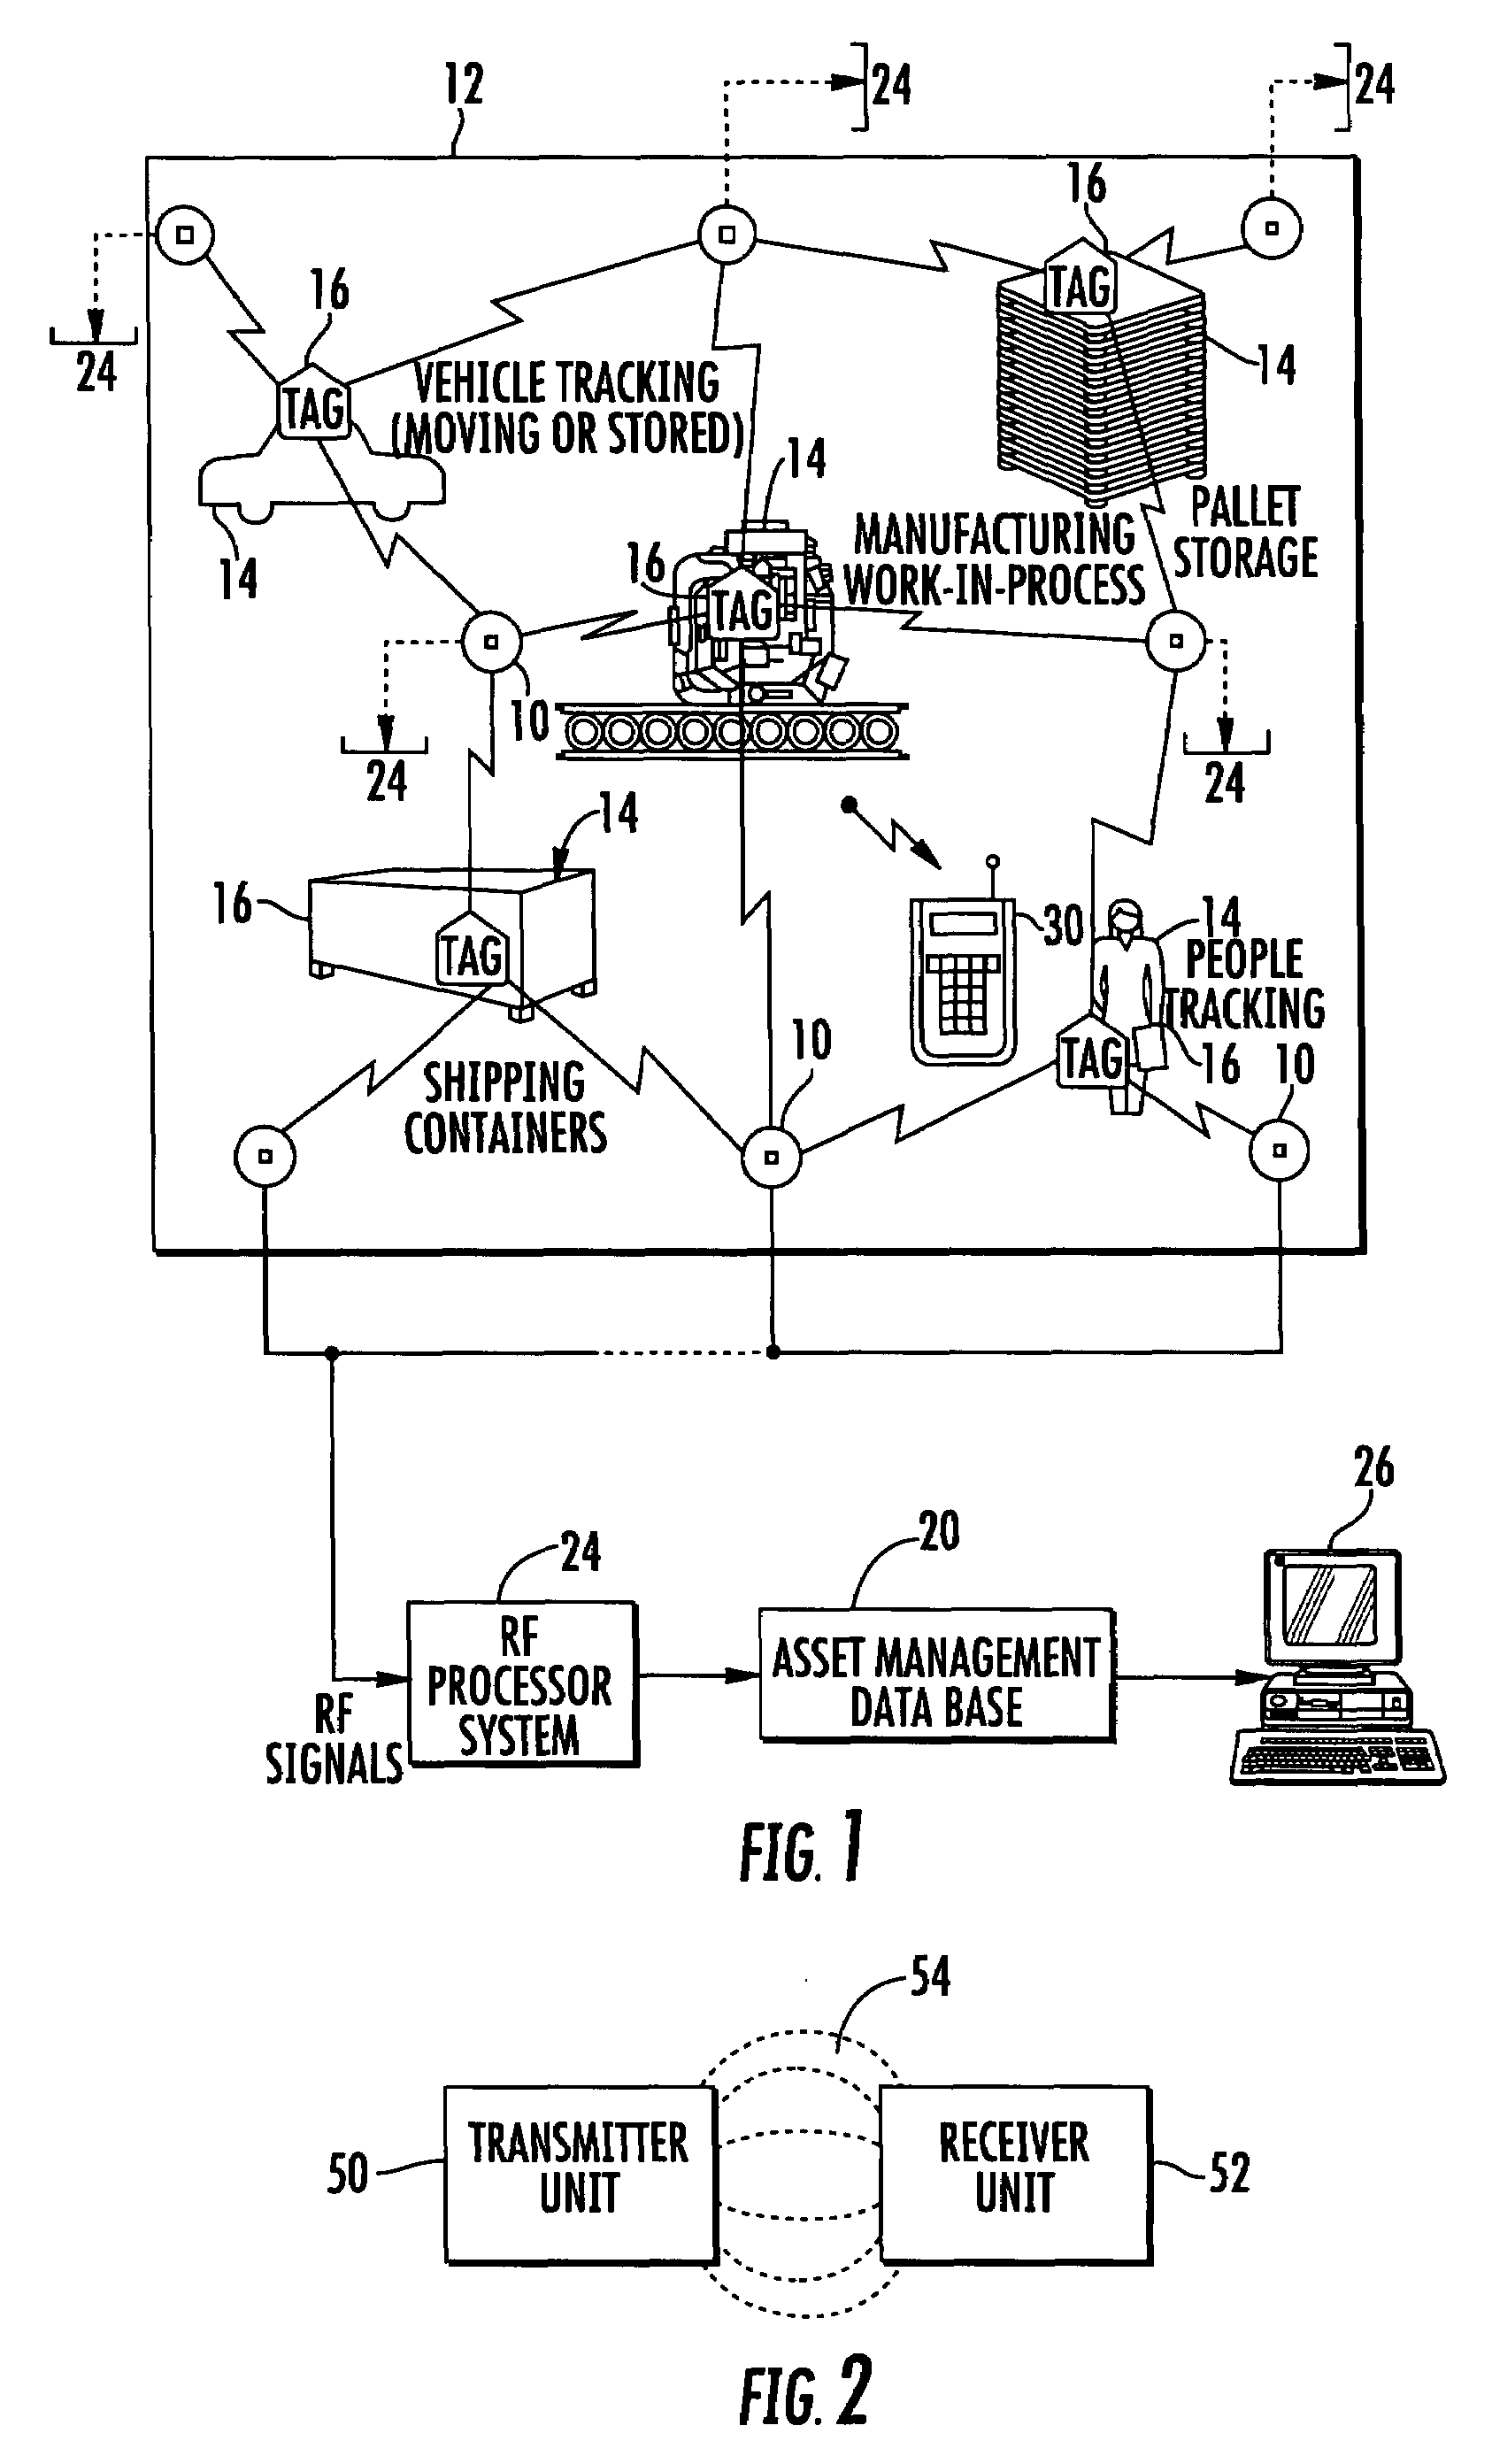 Receiver for object locating and tracking systems and related methods